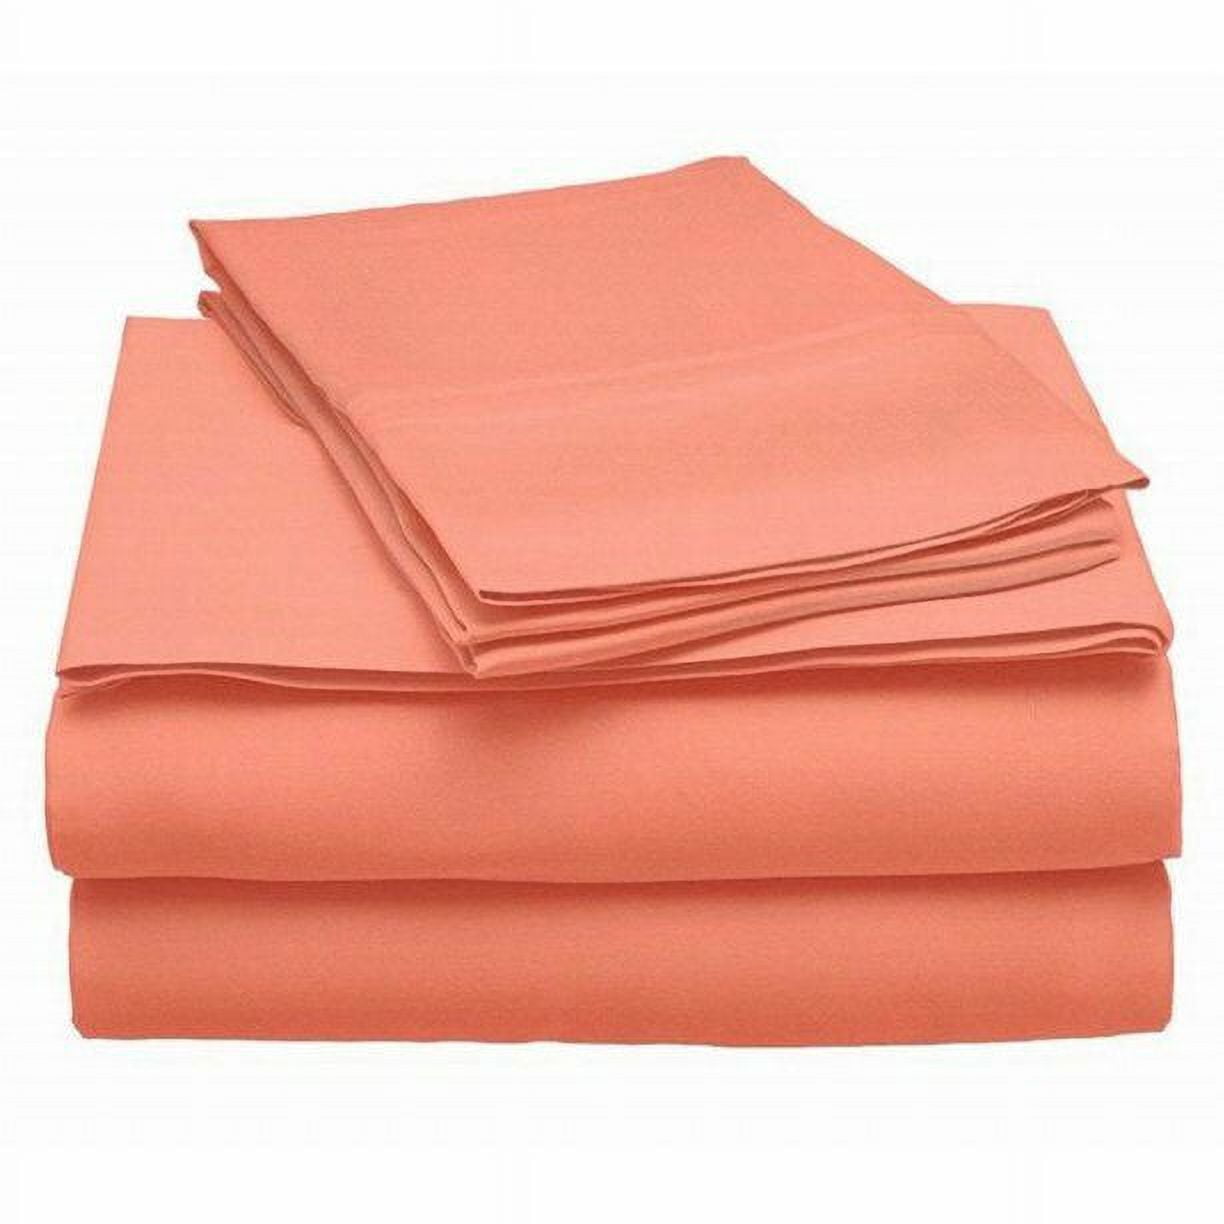 Twin Fitted Sheet, 1800 Thread Count, Ultra Comfort, Deep Pocket –  Overstock Sheets